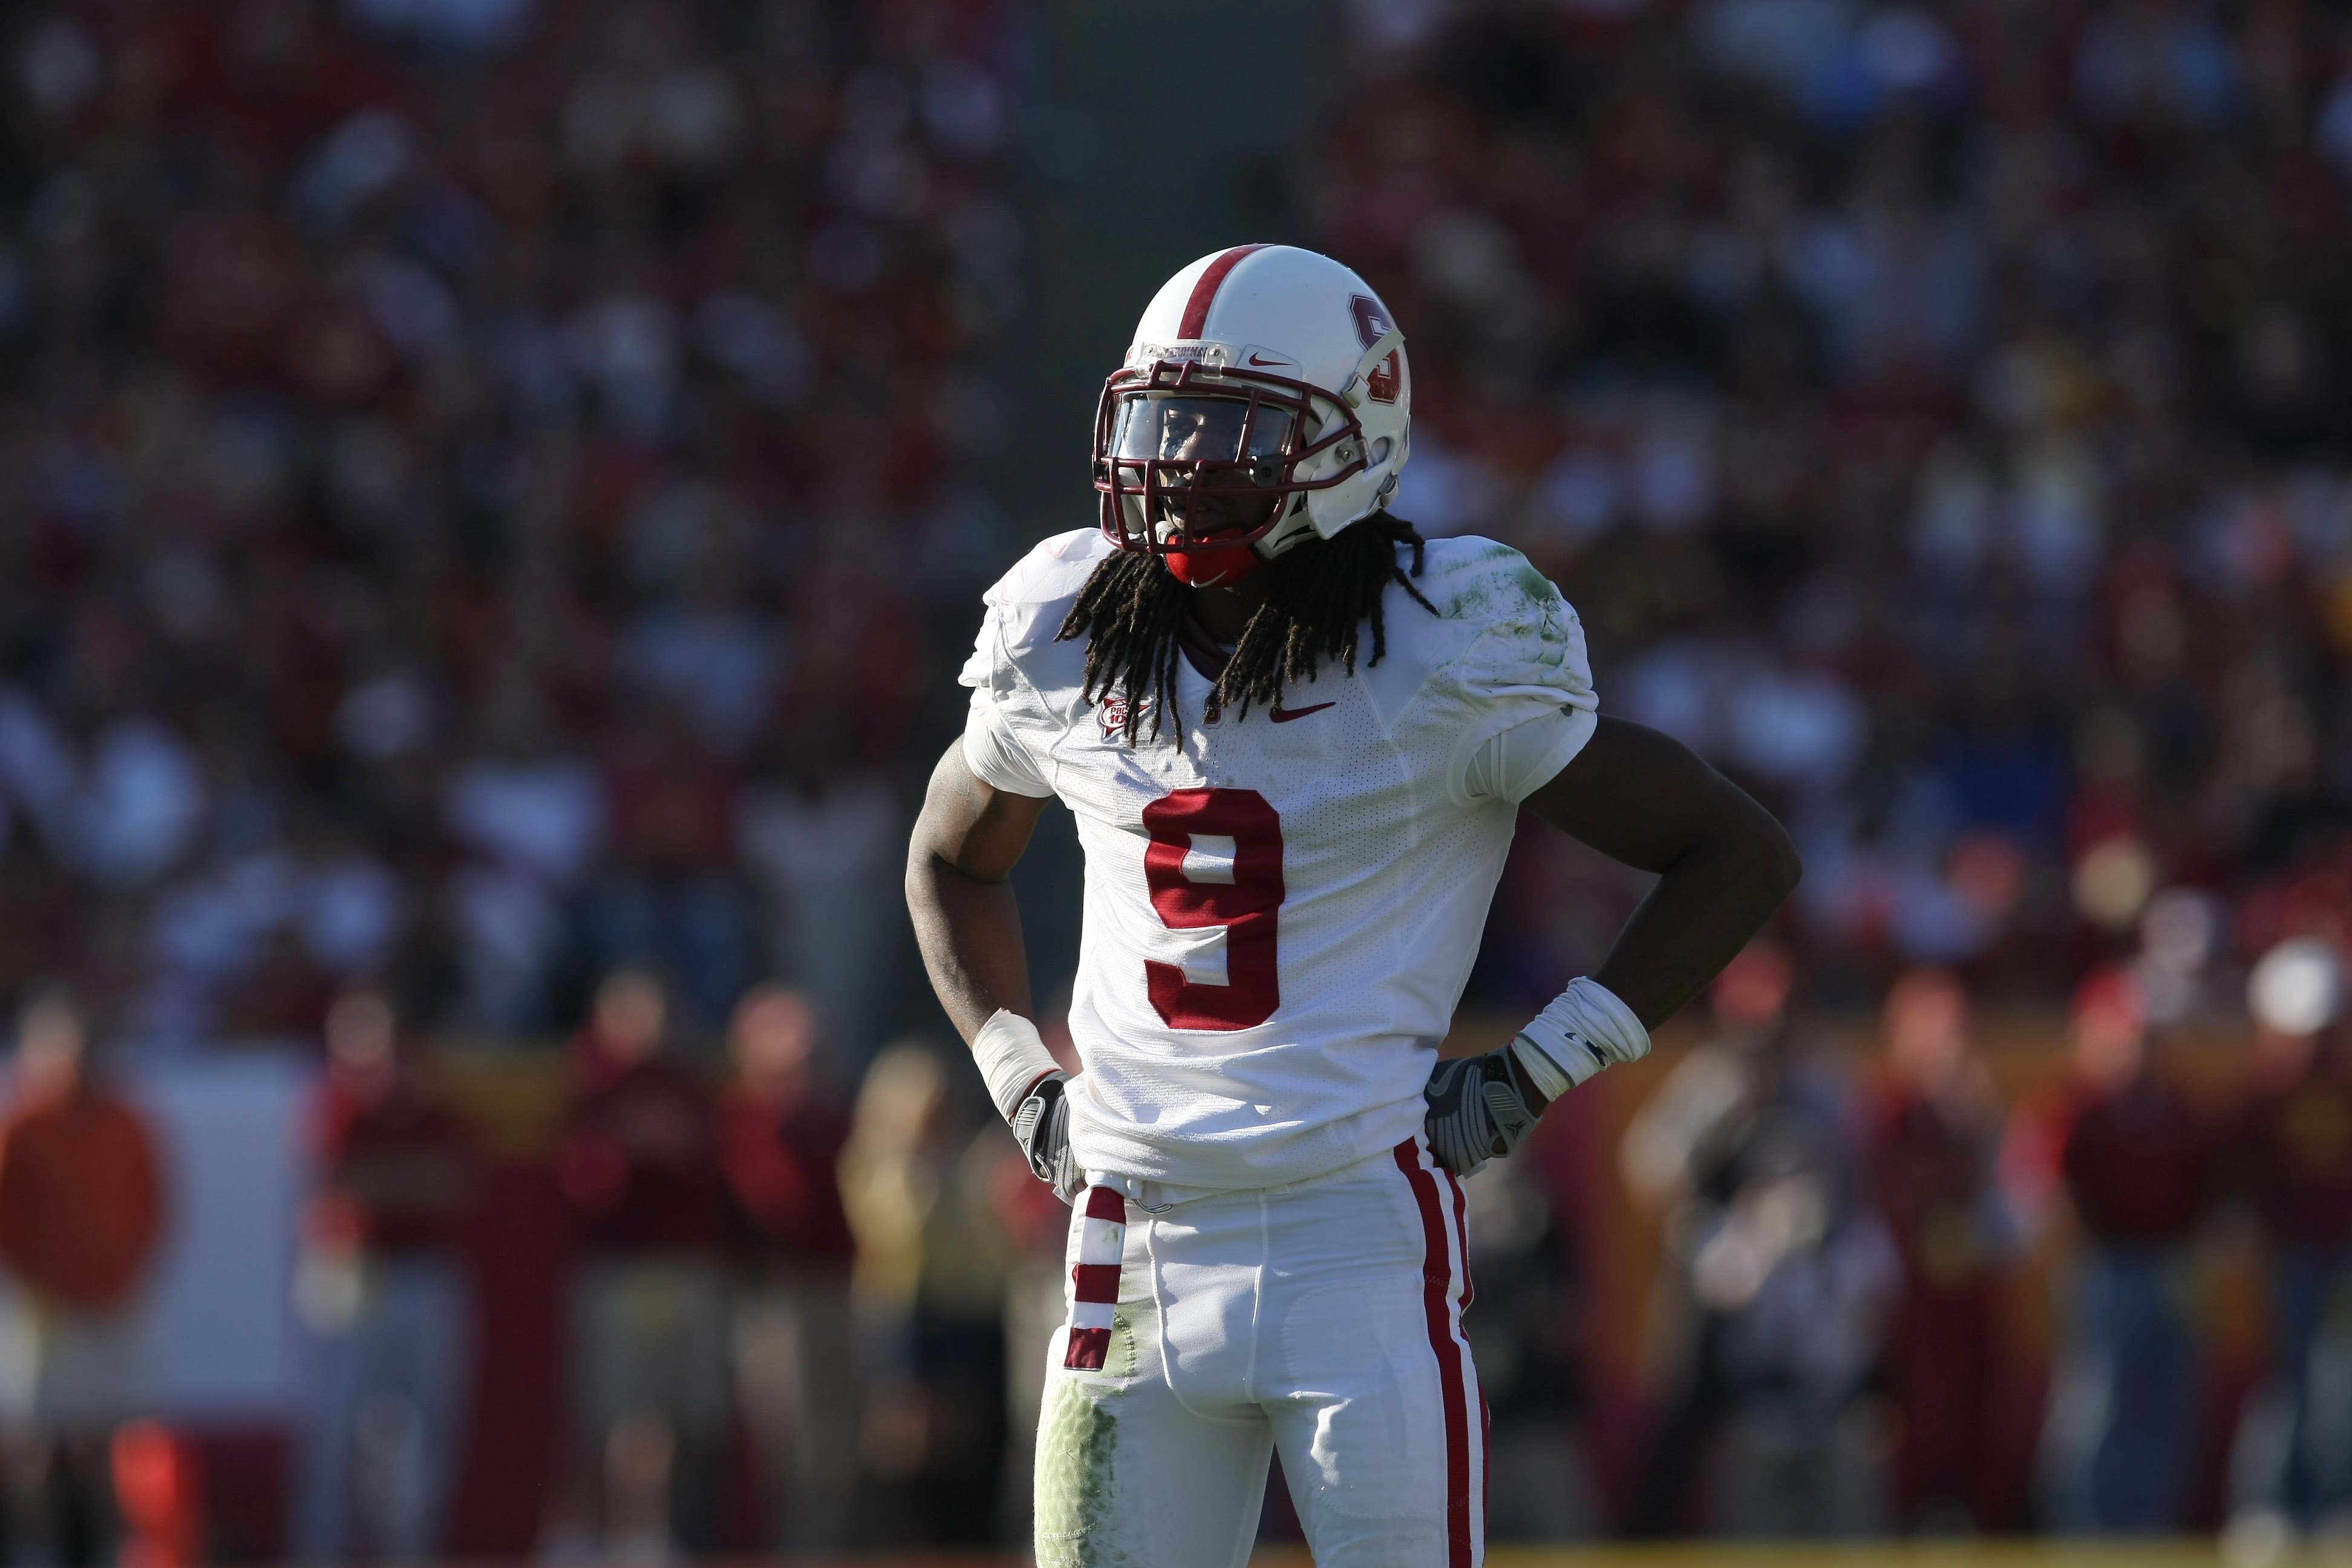 Cornerback Richard Sherman of the Stanford Cardinals during the 2009 season.   (Photo by Stephen Dunn/Getty Images)